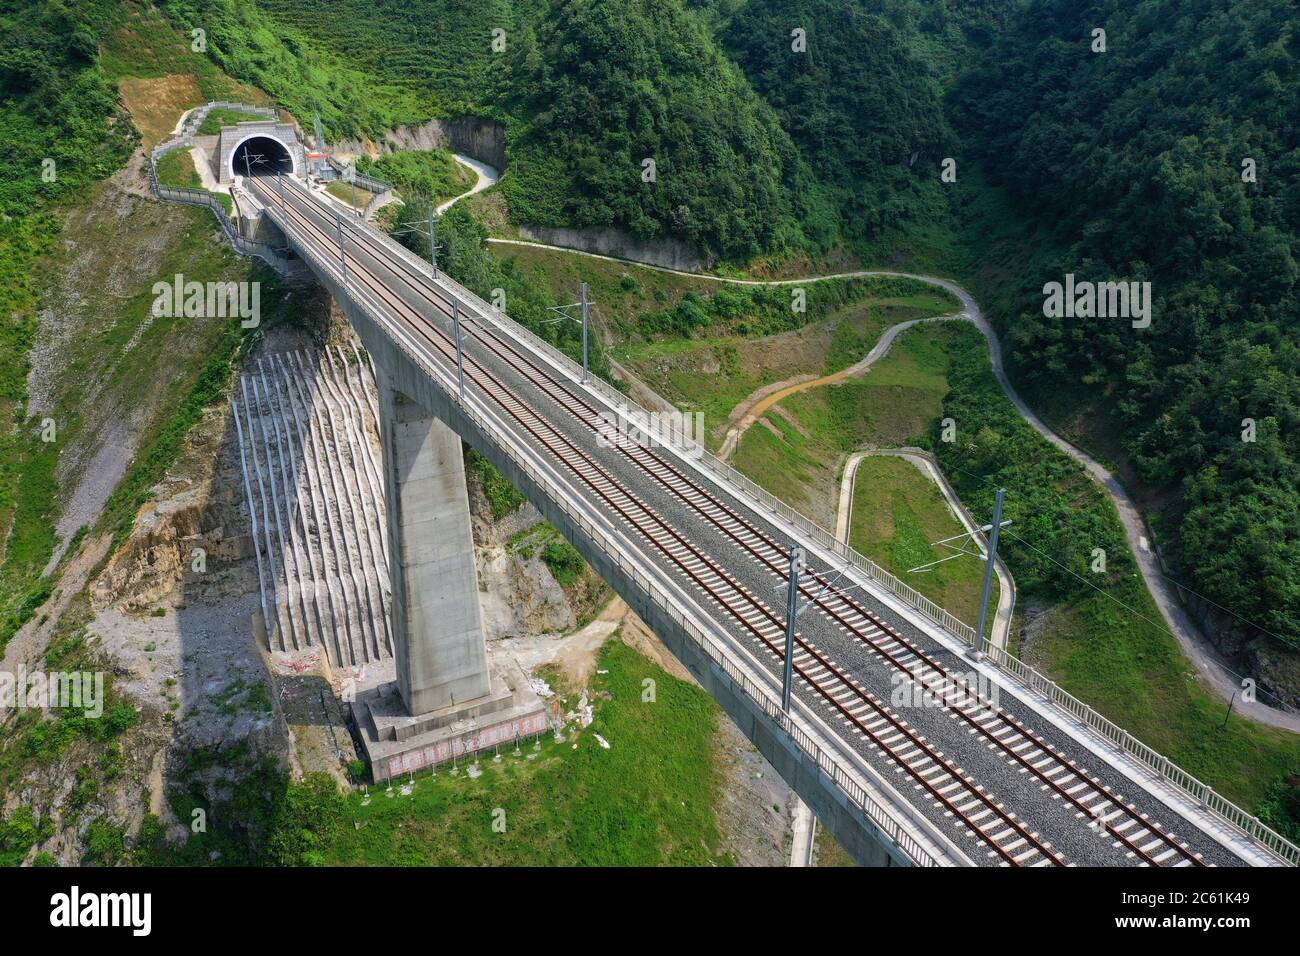 Liupanshui. 6th July, 2020. Aerial photo taken on July 6, 2020 shows a railway bridge along the Anshun-Liupanshui railway in southwest China's Guizhou Province. The Anshun-Liupanshui intercity railway, with a designed speed of 250 km per hour, is being prepared for opening. The railway will shorten the travel time between Guiyang and Liupanshui from the current 3.5 hours to about 1 hour, and Liupanshui City will be fully connected with the national high-speed rail network. Credit: Liu Xu/Xinhua/Alamy Live News Stock Photo